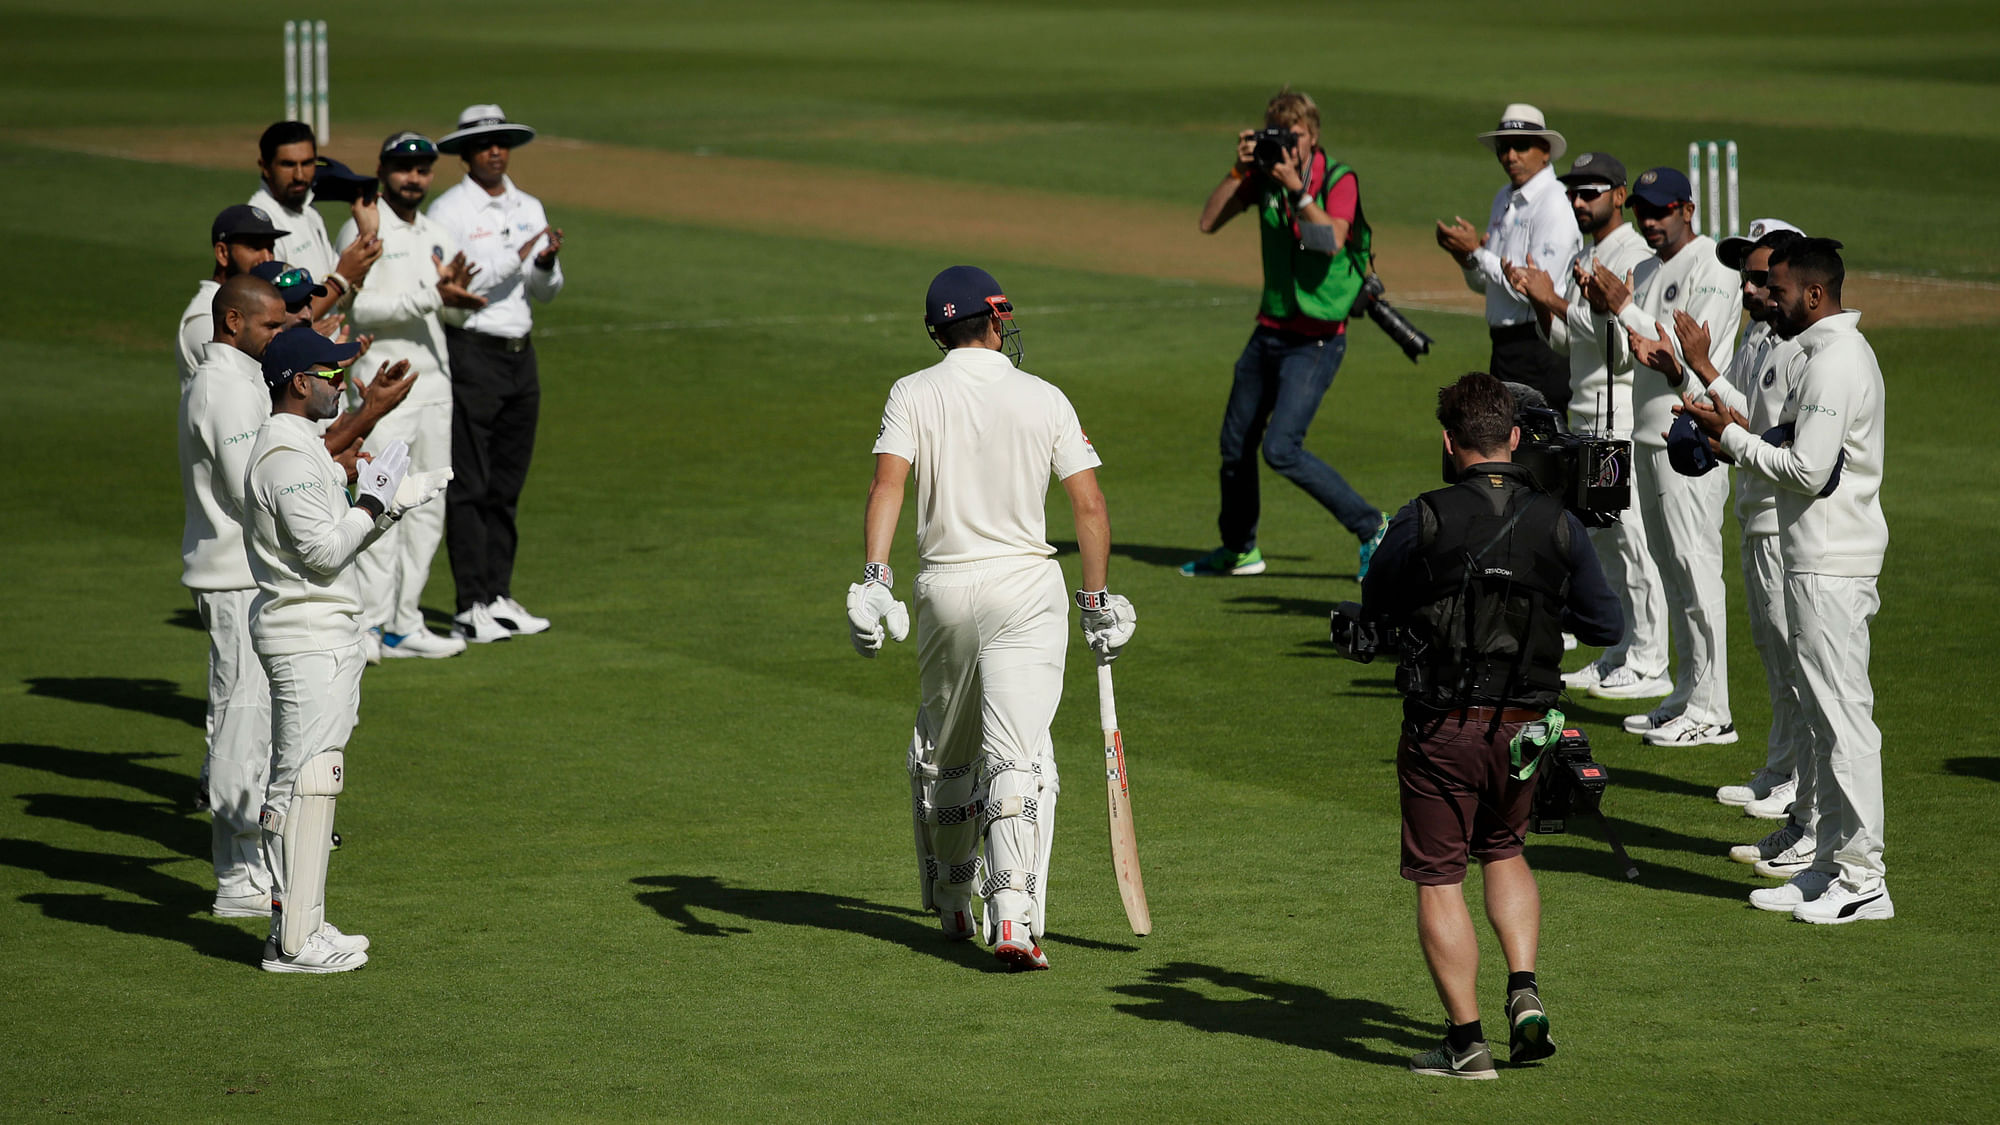 England’s Alastair Cook, center, walks out to bat in his last ever test match during the fifth Test match between England and India at the Oval cricket ground.